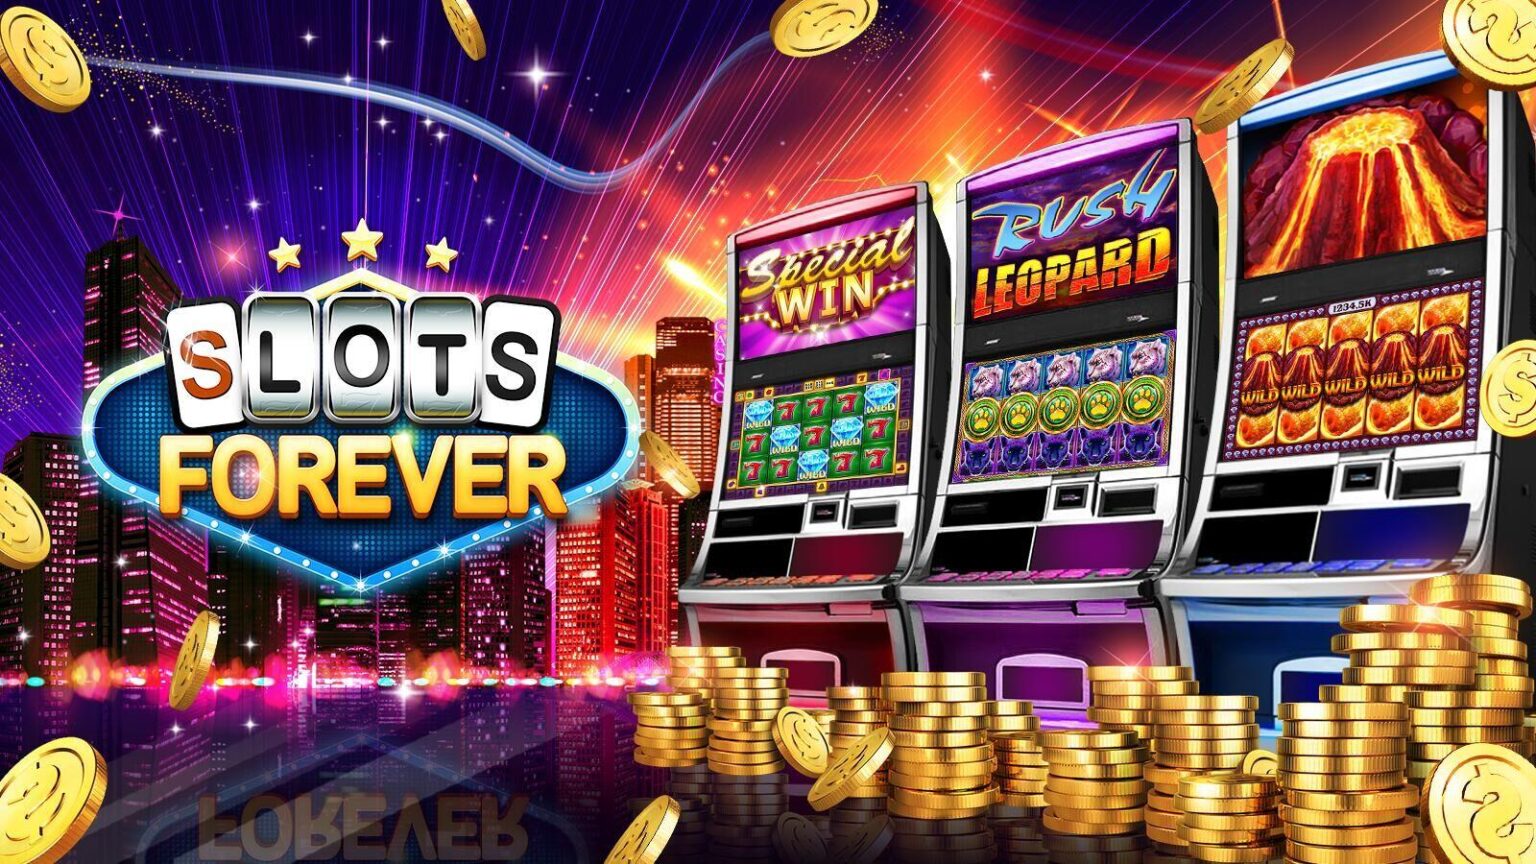 Online Casino - Play Slots, Table Games